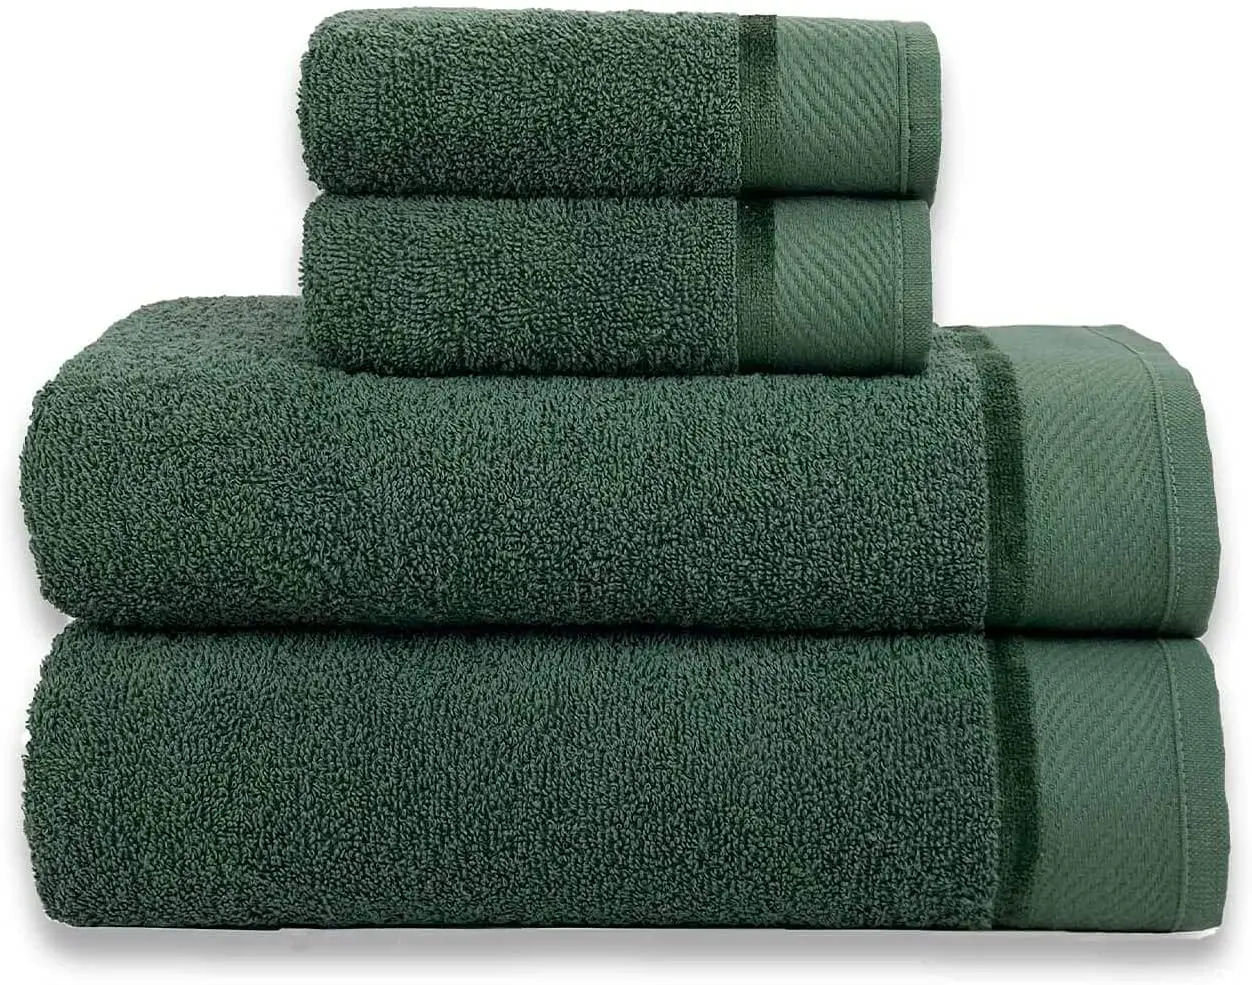 

Giant Thick Towels 4 Pieces Luxury Game - Canada (Green Moss) Microfiber Towels Bathroom Hotel Bath Towels For Thicken Soft Clea